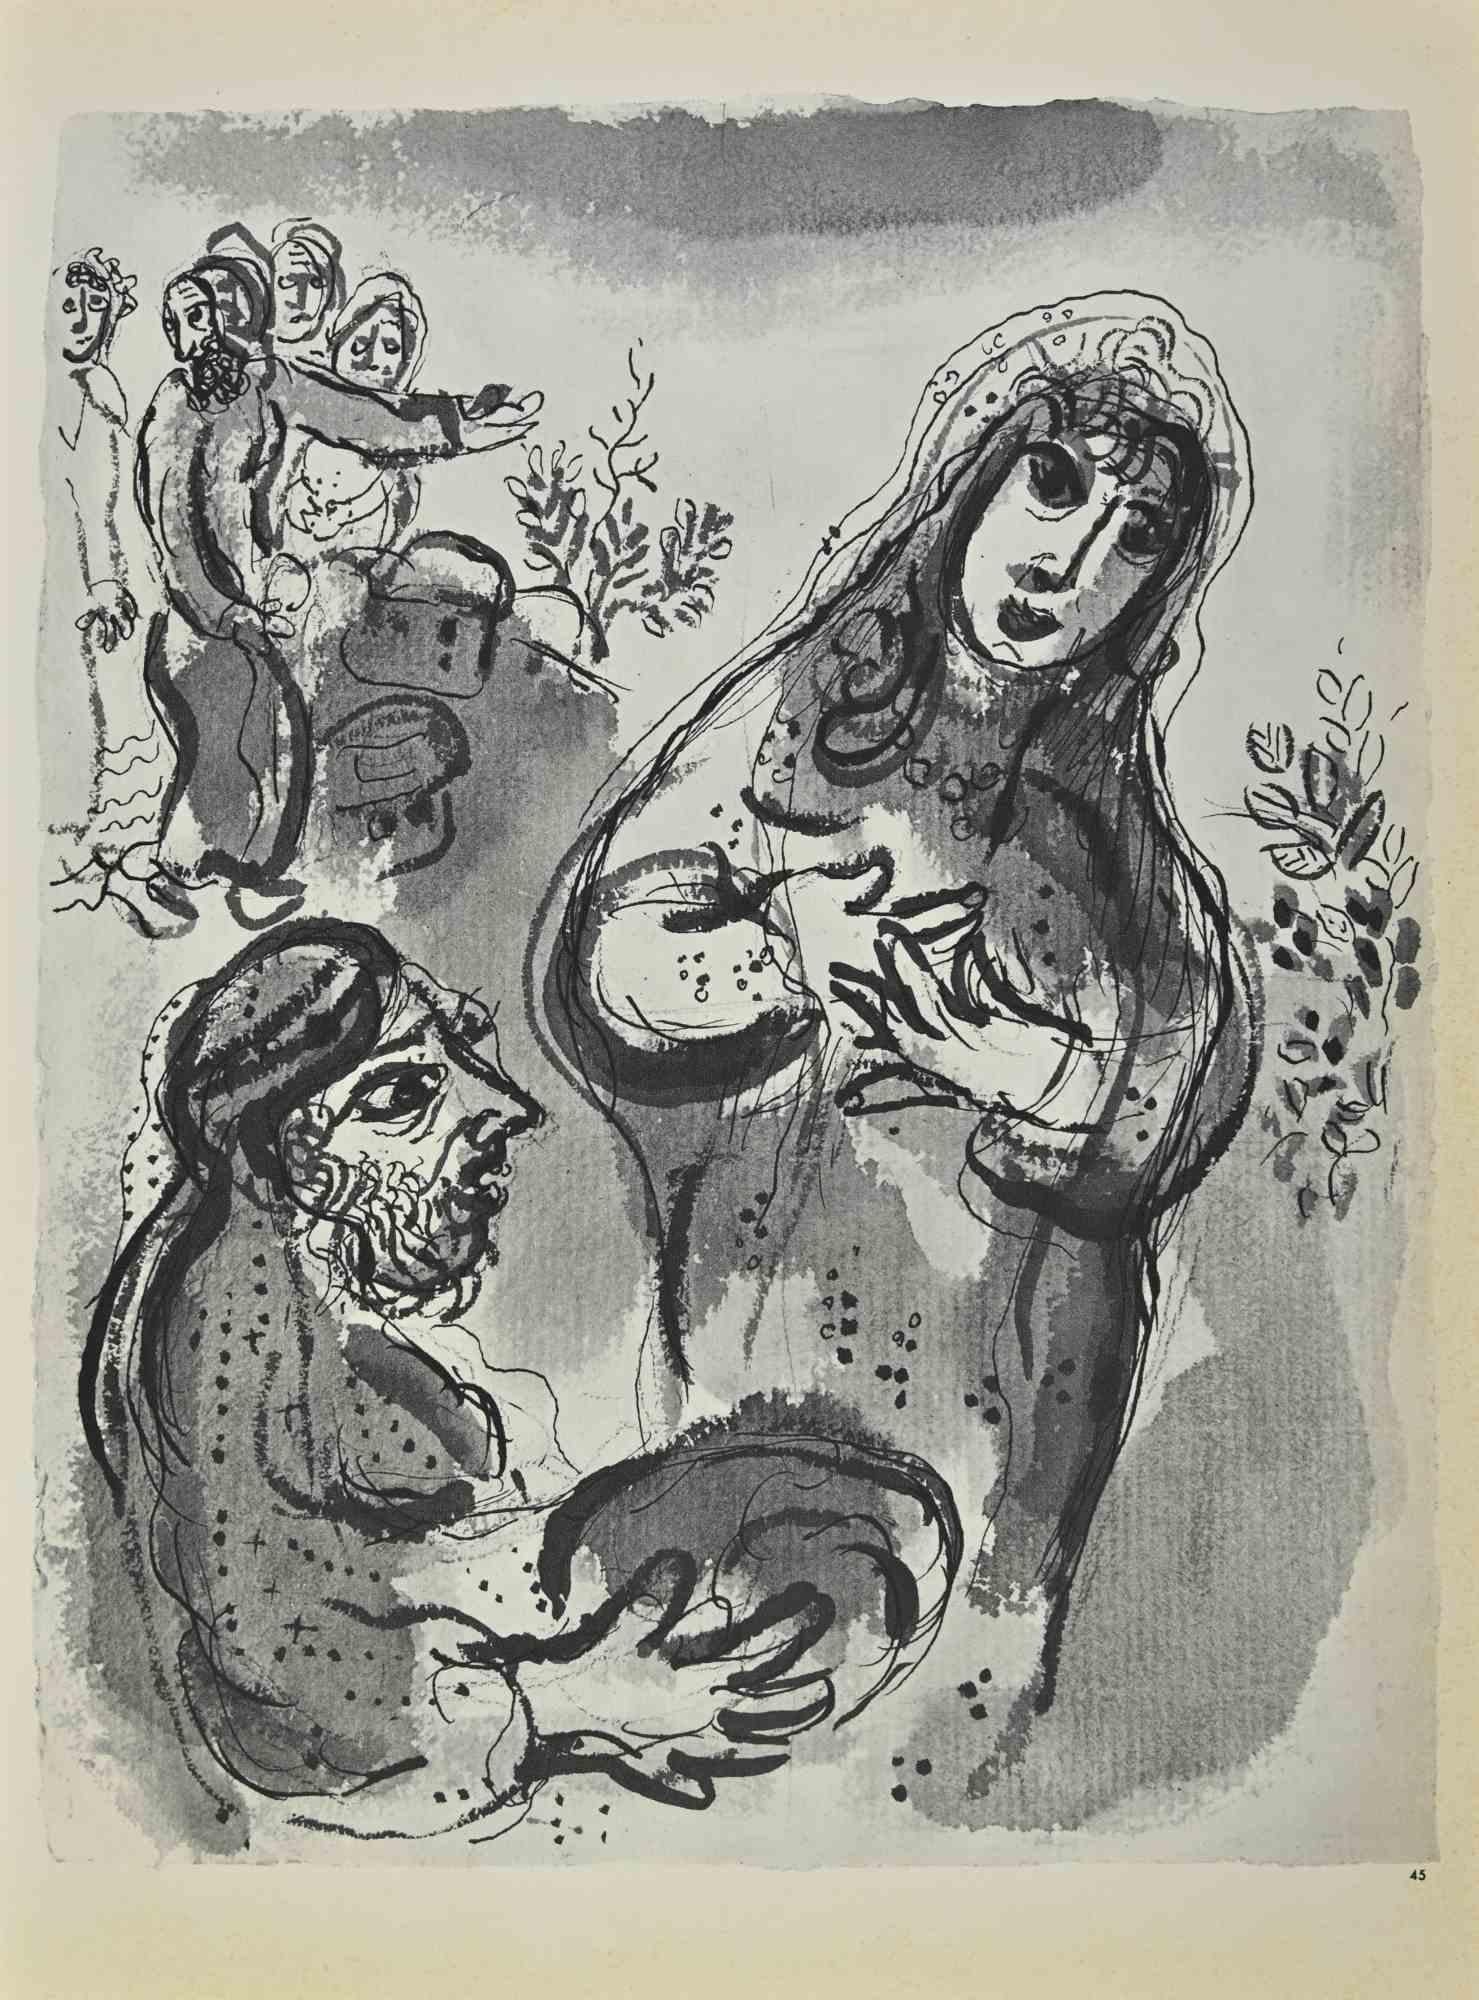 Birth of Samuel is an artwork realized by March Chagall, 1960s.

Lithograph on brown-toned paper, no signature.

Lithograph on both sheets.

Edition of 6500 unsigned lithographs. Printed by Mourlot and published by Tériade, Paris.

Ref. Mourlot, F.,